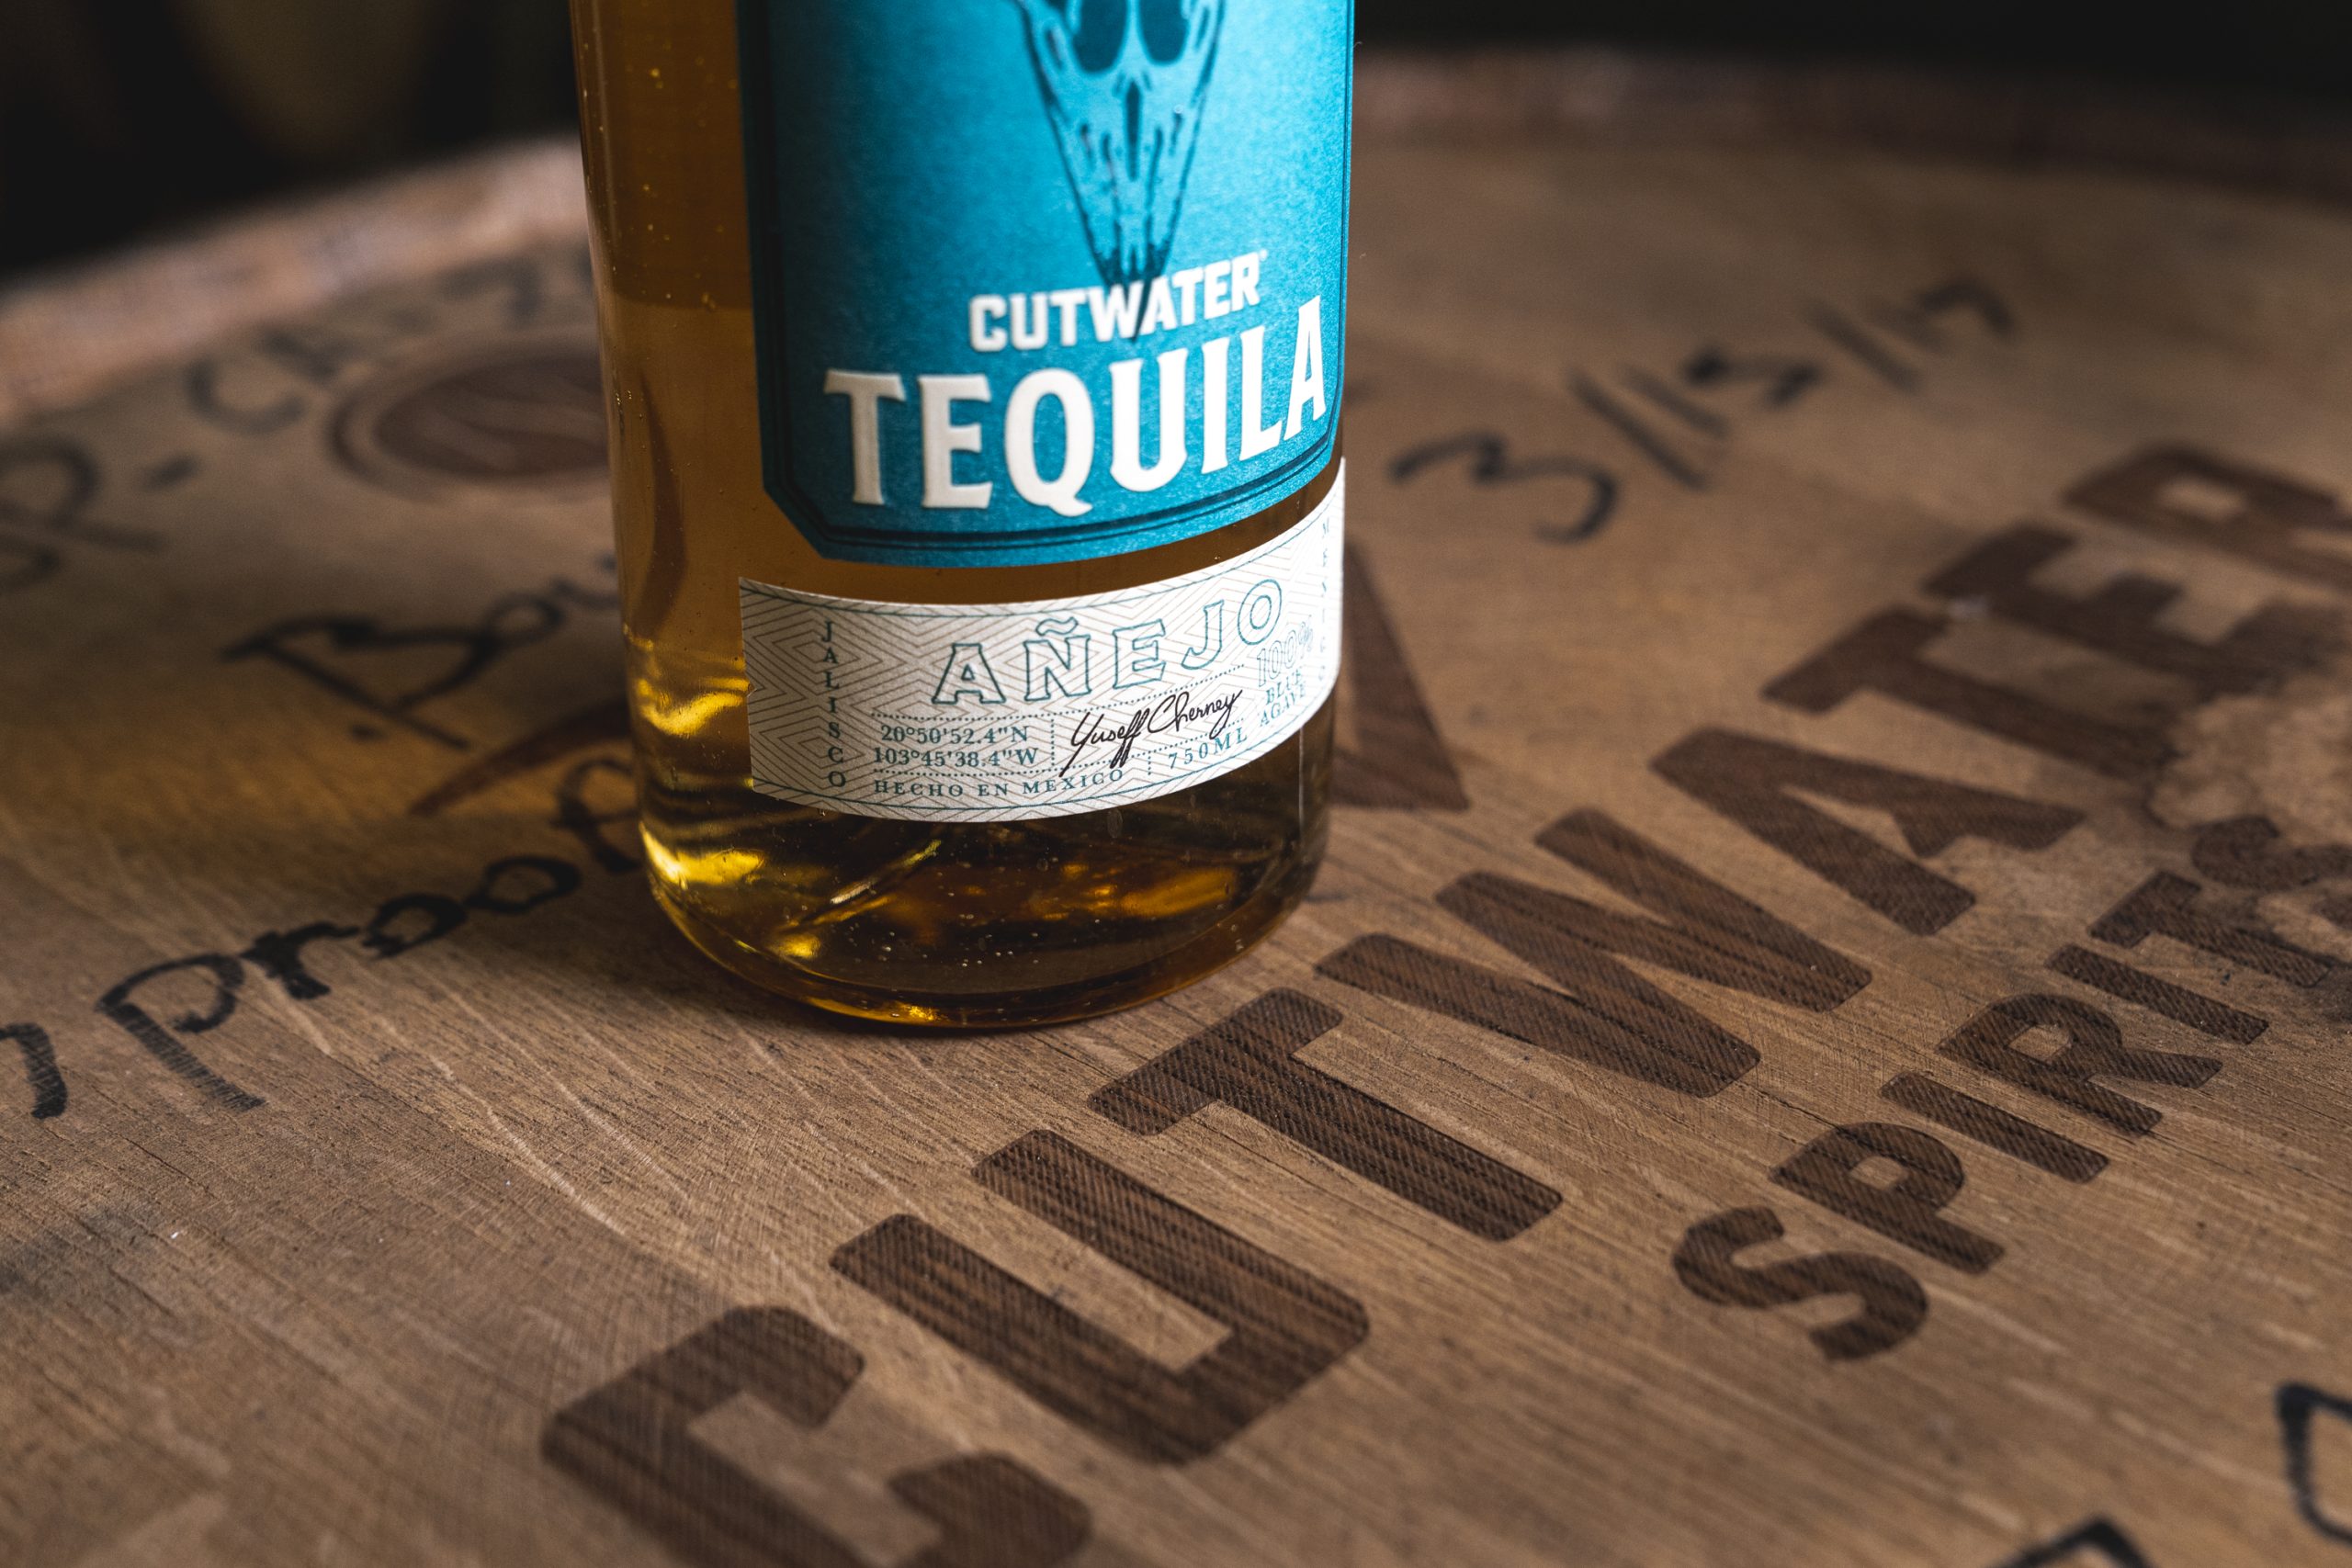 Cutwater’s bottled Añejo tequila is your time machine back to an era when blue agave was slow-cooked in traditional brick ovens, open-fermented then double-distilled on a custom-designed “alambique” made of stainless steel and copper. The result is magnificent. Photo courtesy of Cutwater Tequila